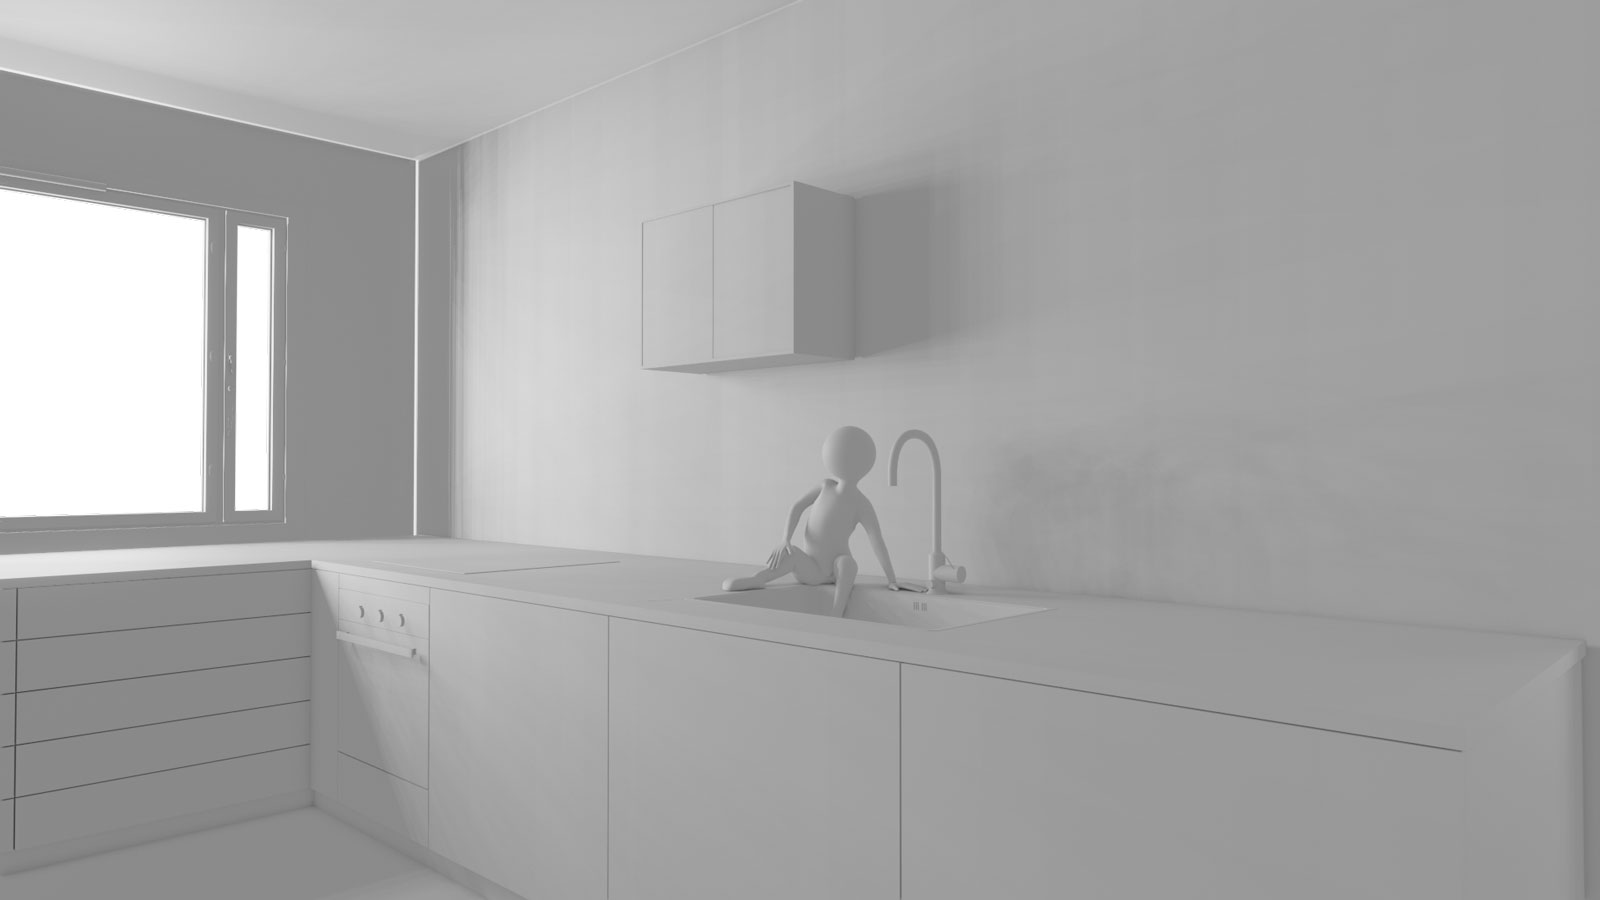 A scene from Deep Address: a human-like avatar sitting on a counter in a white room.